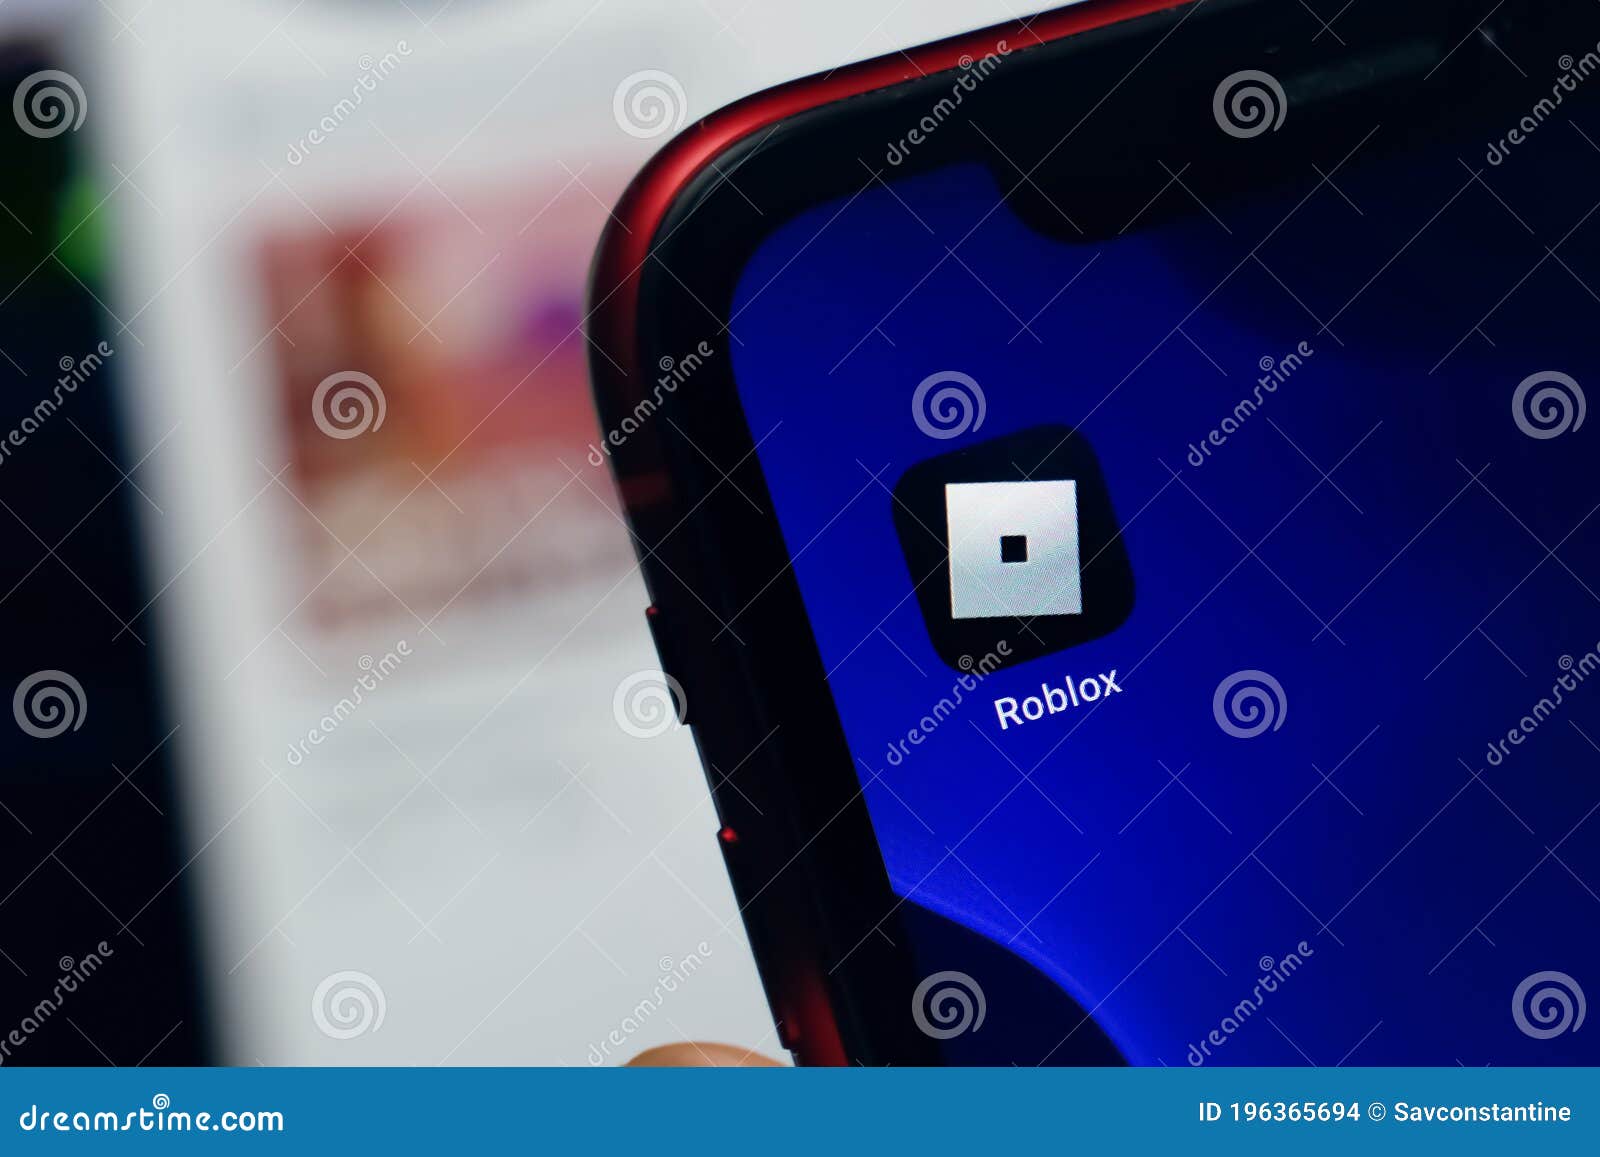 Roblox App Editorial Stock Image Image Of Graphic 196365694 - roblox background id